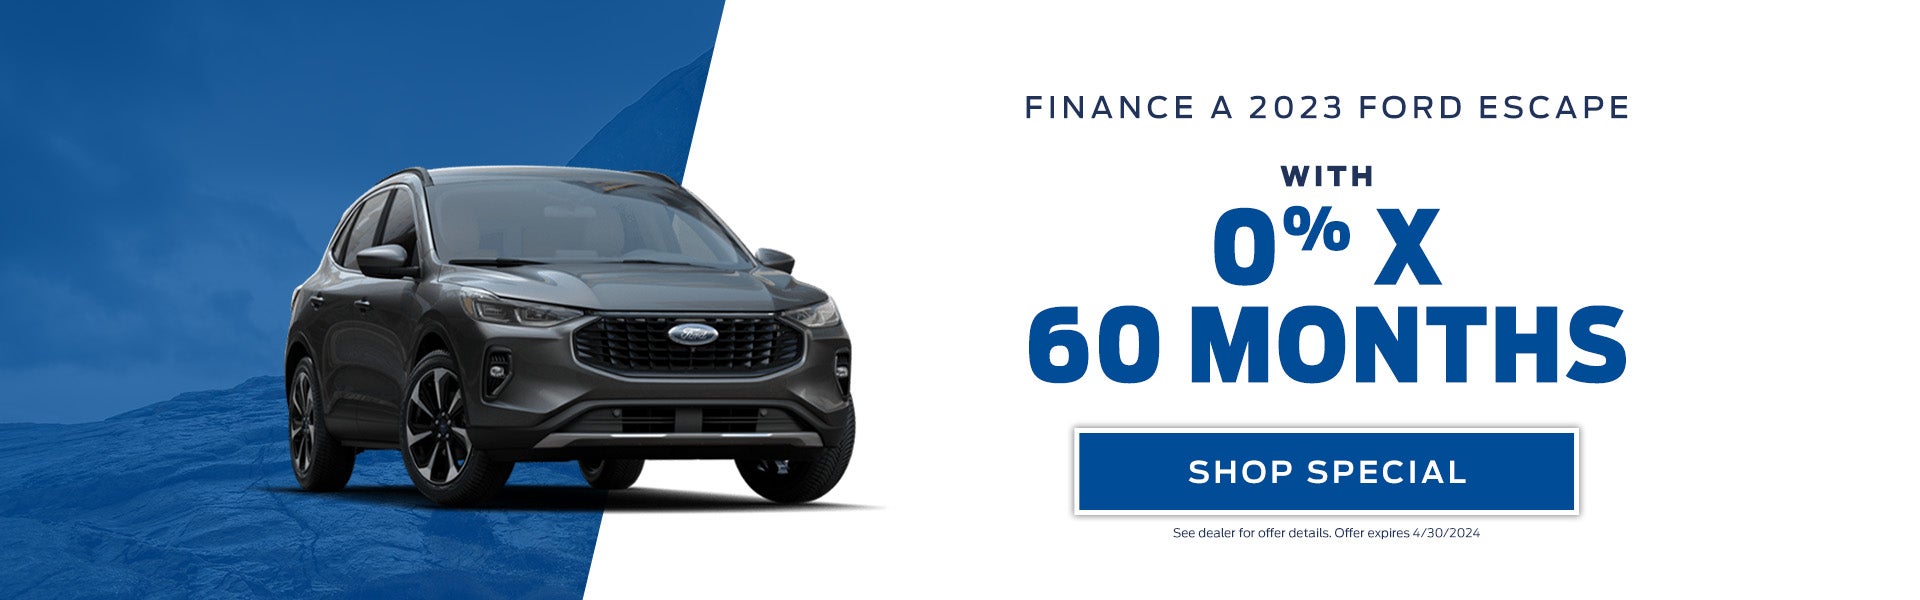 Finance a Mach-E with 0% for 60 months 